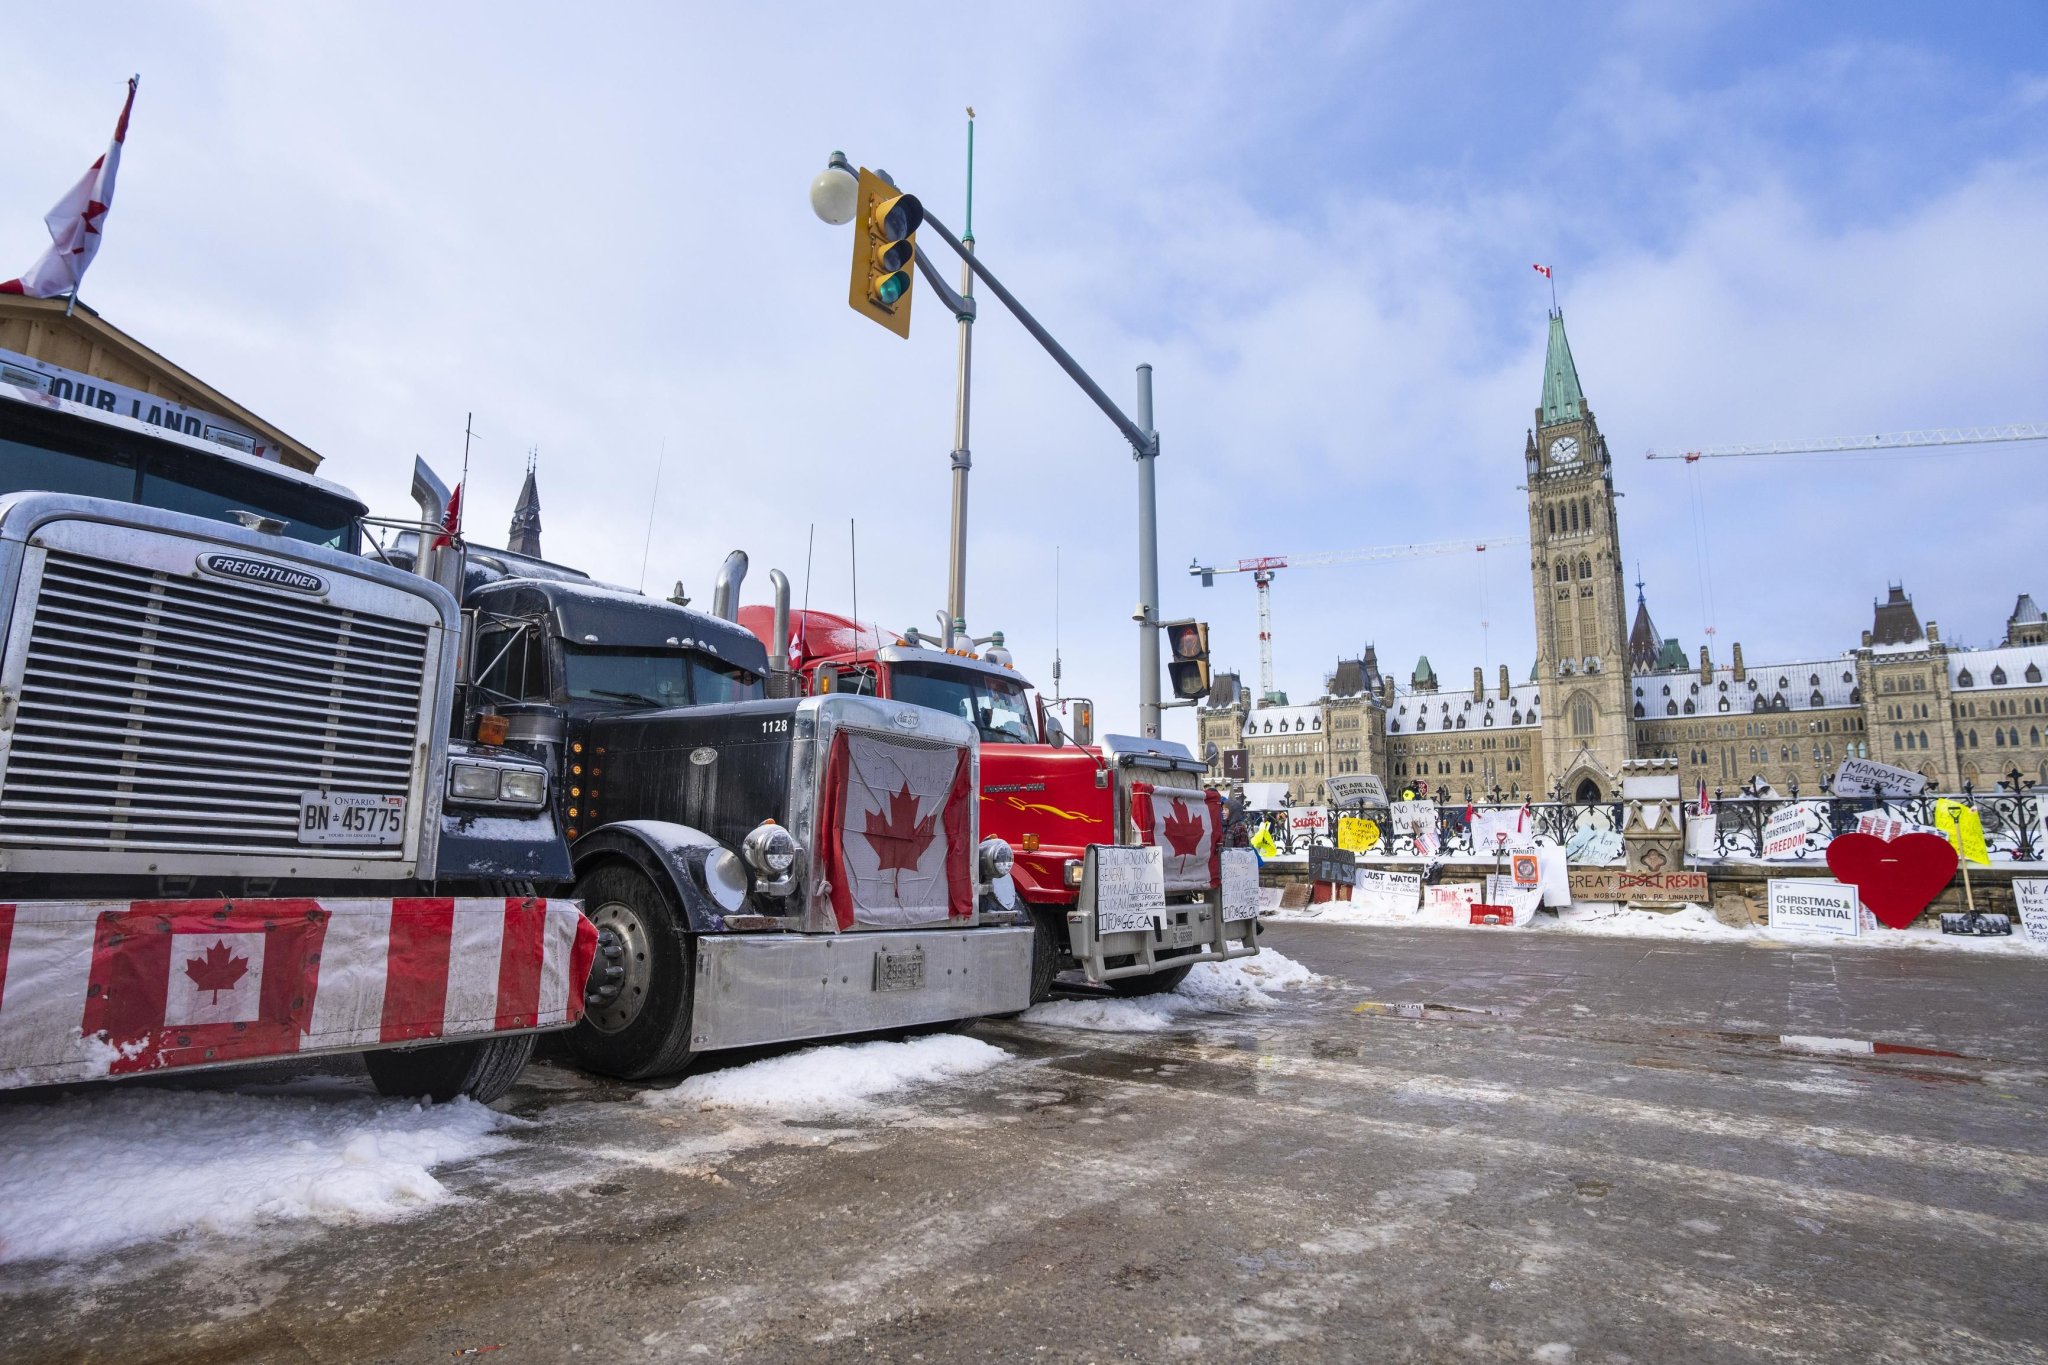 Ontario Is Giving Up To $5K To Ottawa Businesses That Were Impacted By The Freedom Convoy